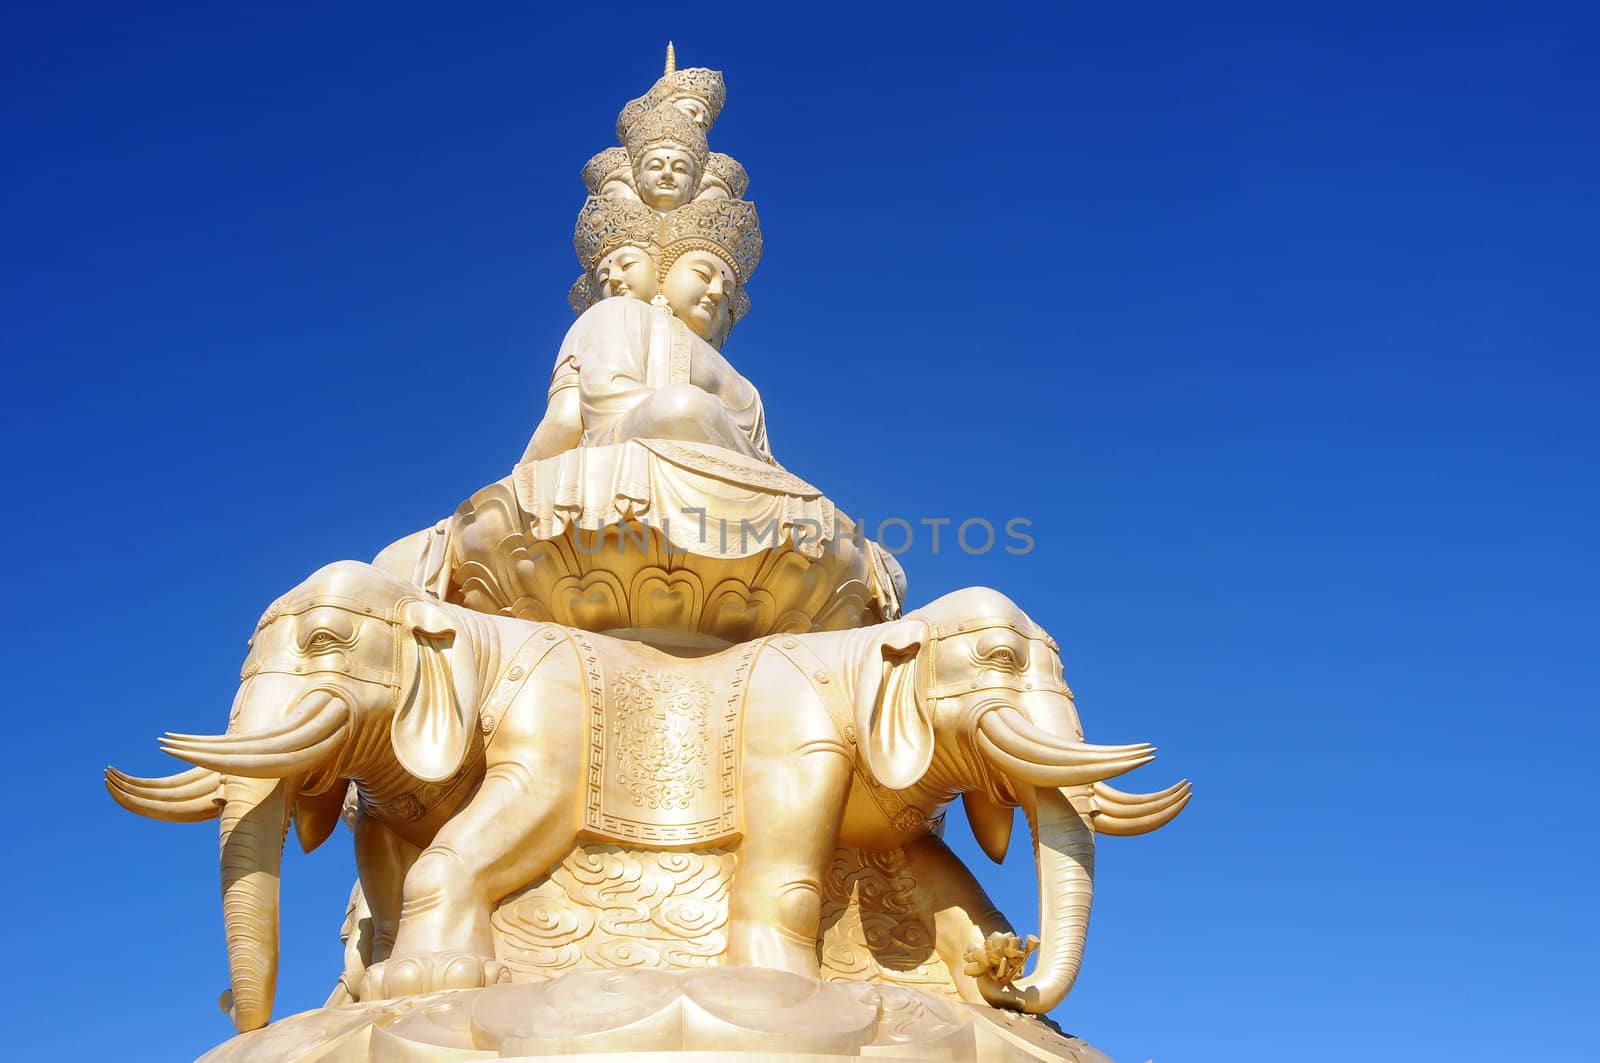 The famous Golden Buddha statue at the top of Emei Mountains in Sichuan, China